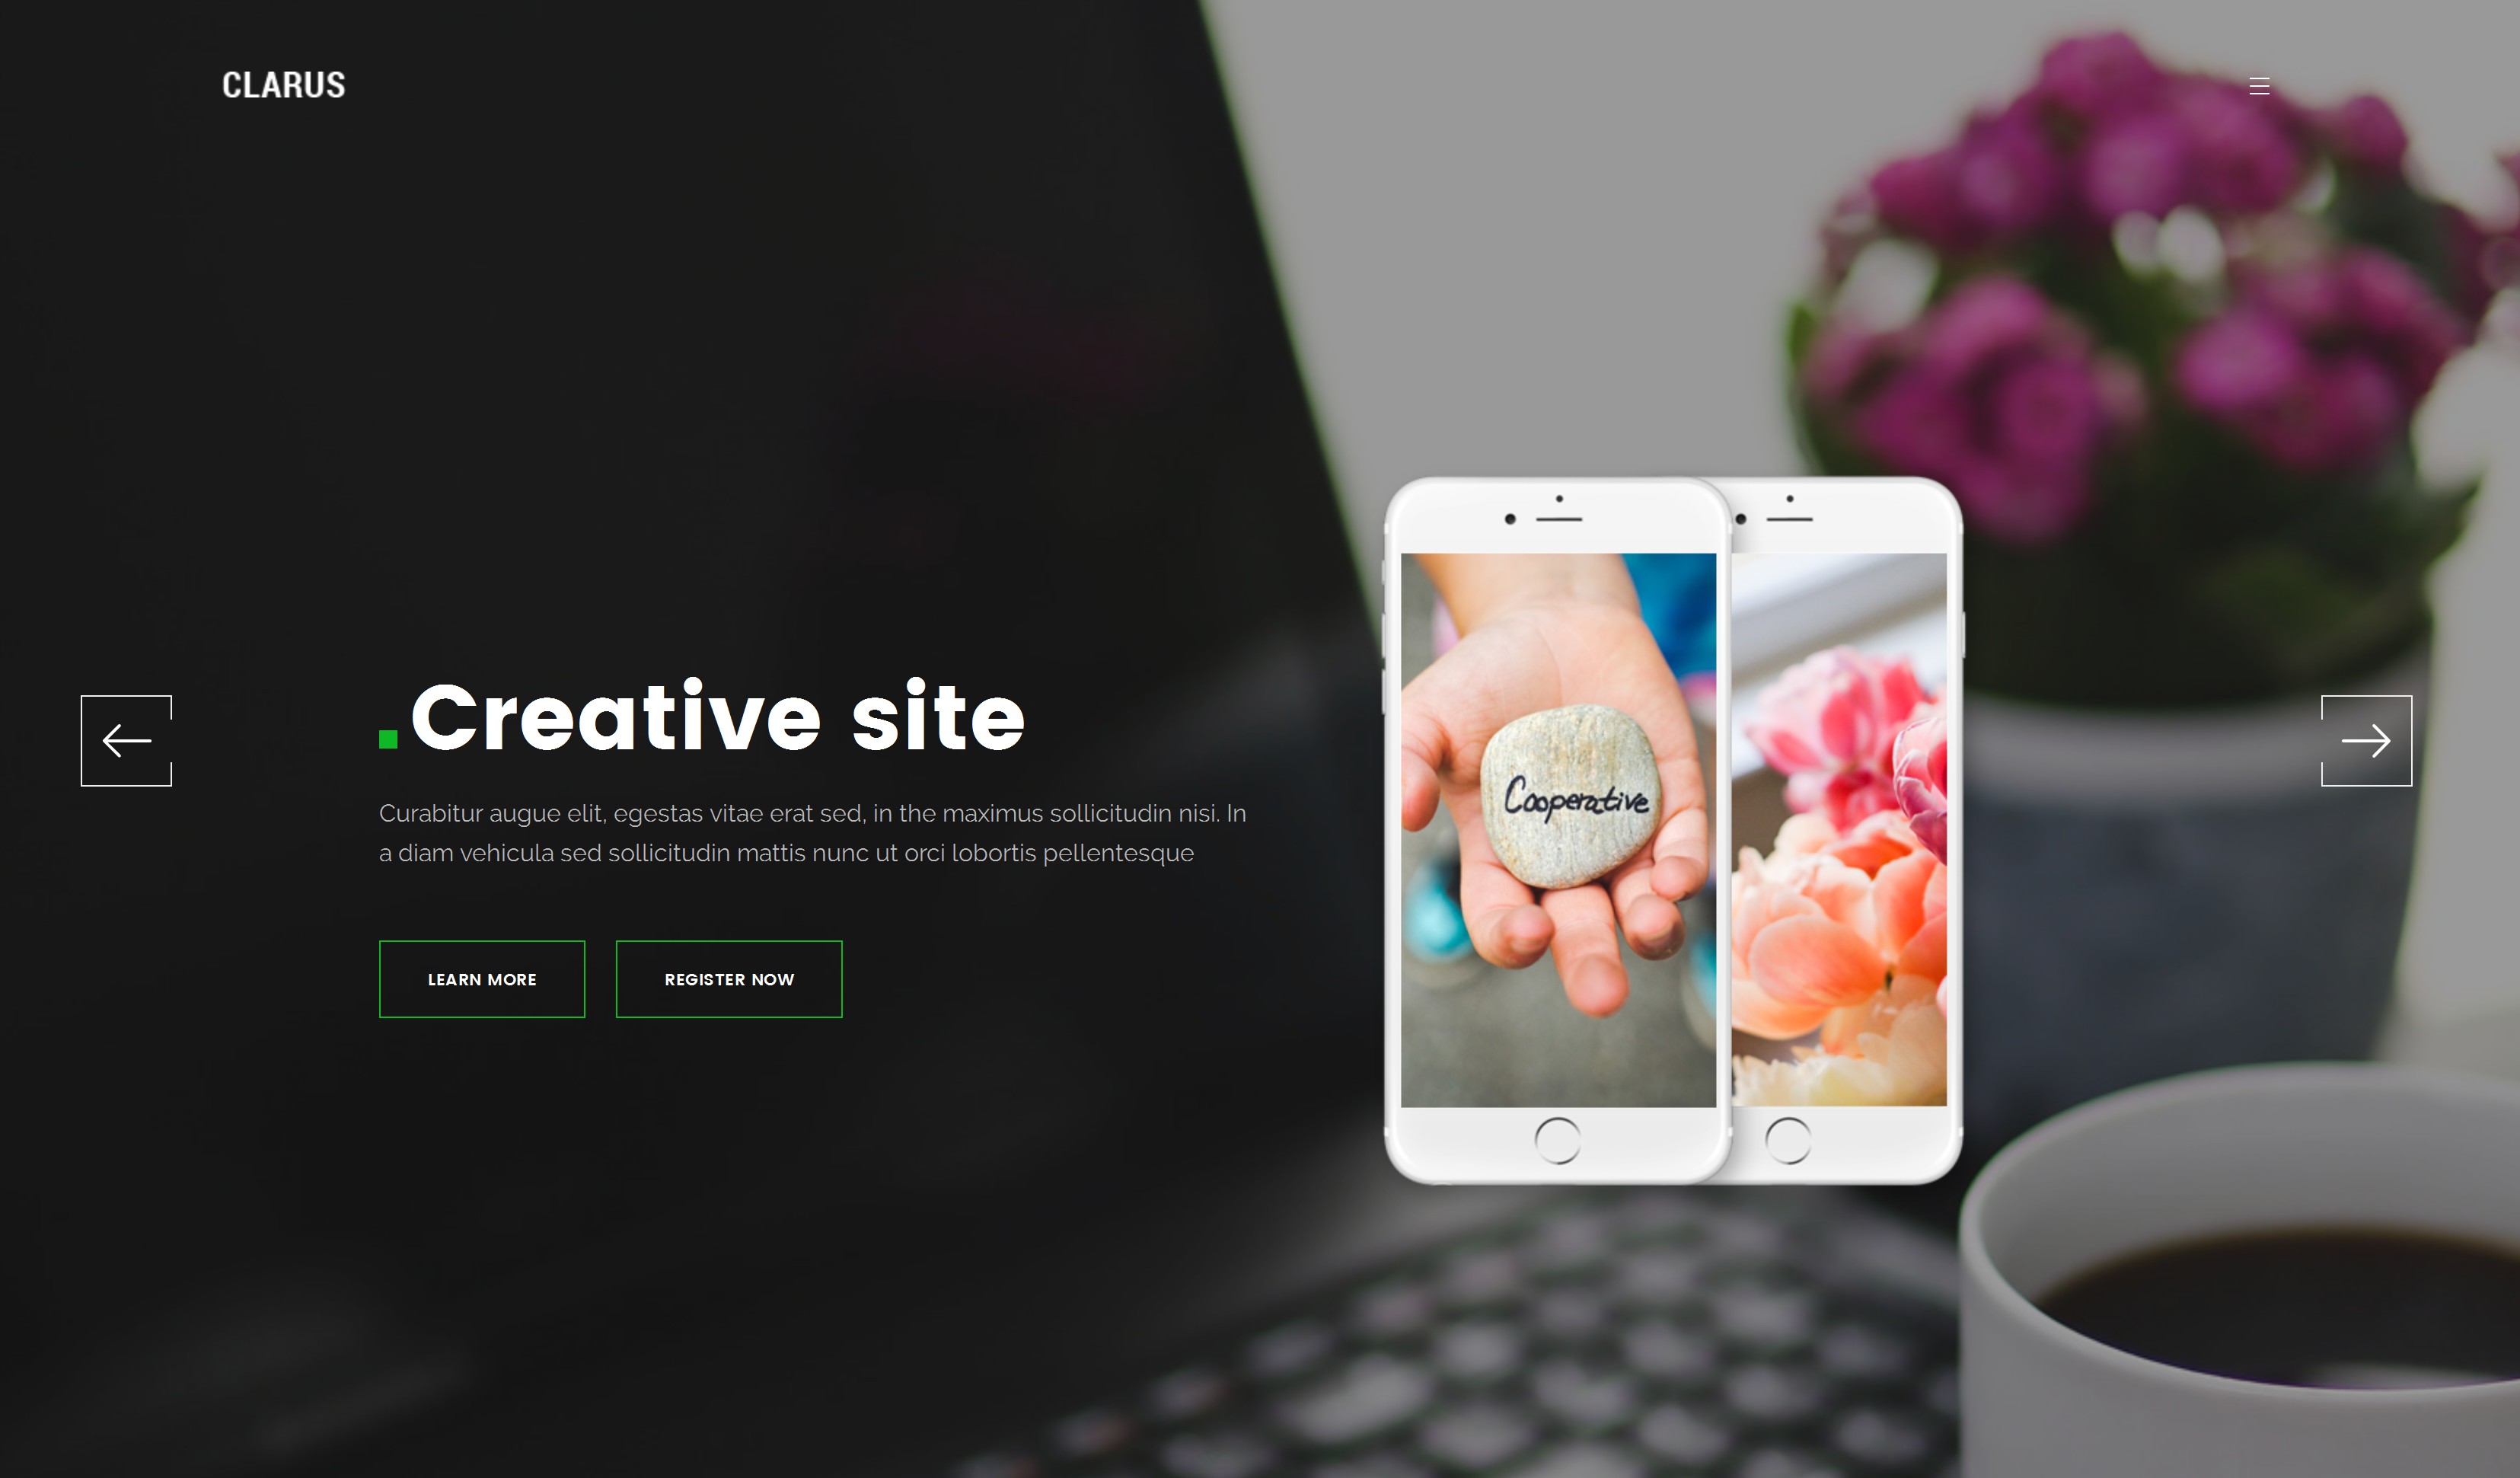 Responsive Bootstrap OnePage Theme